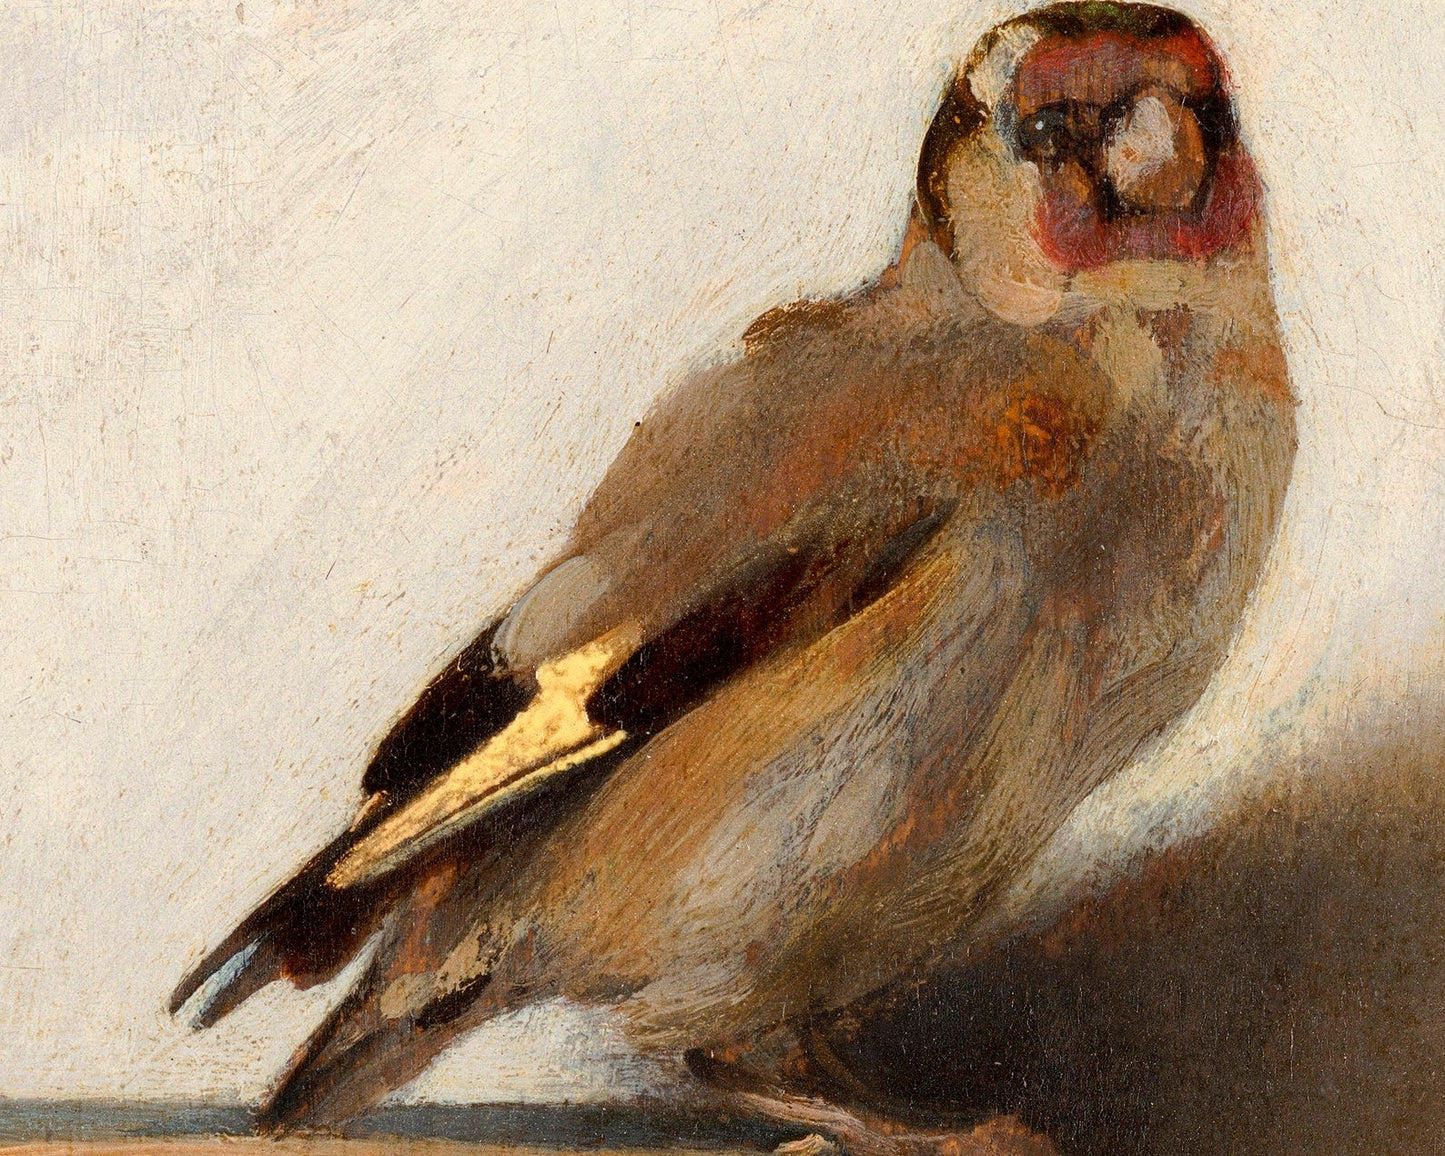 Carel Fabritius - "The Goldfinch" (1654) - Mabon Gallery